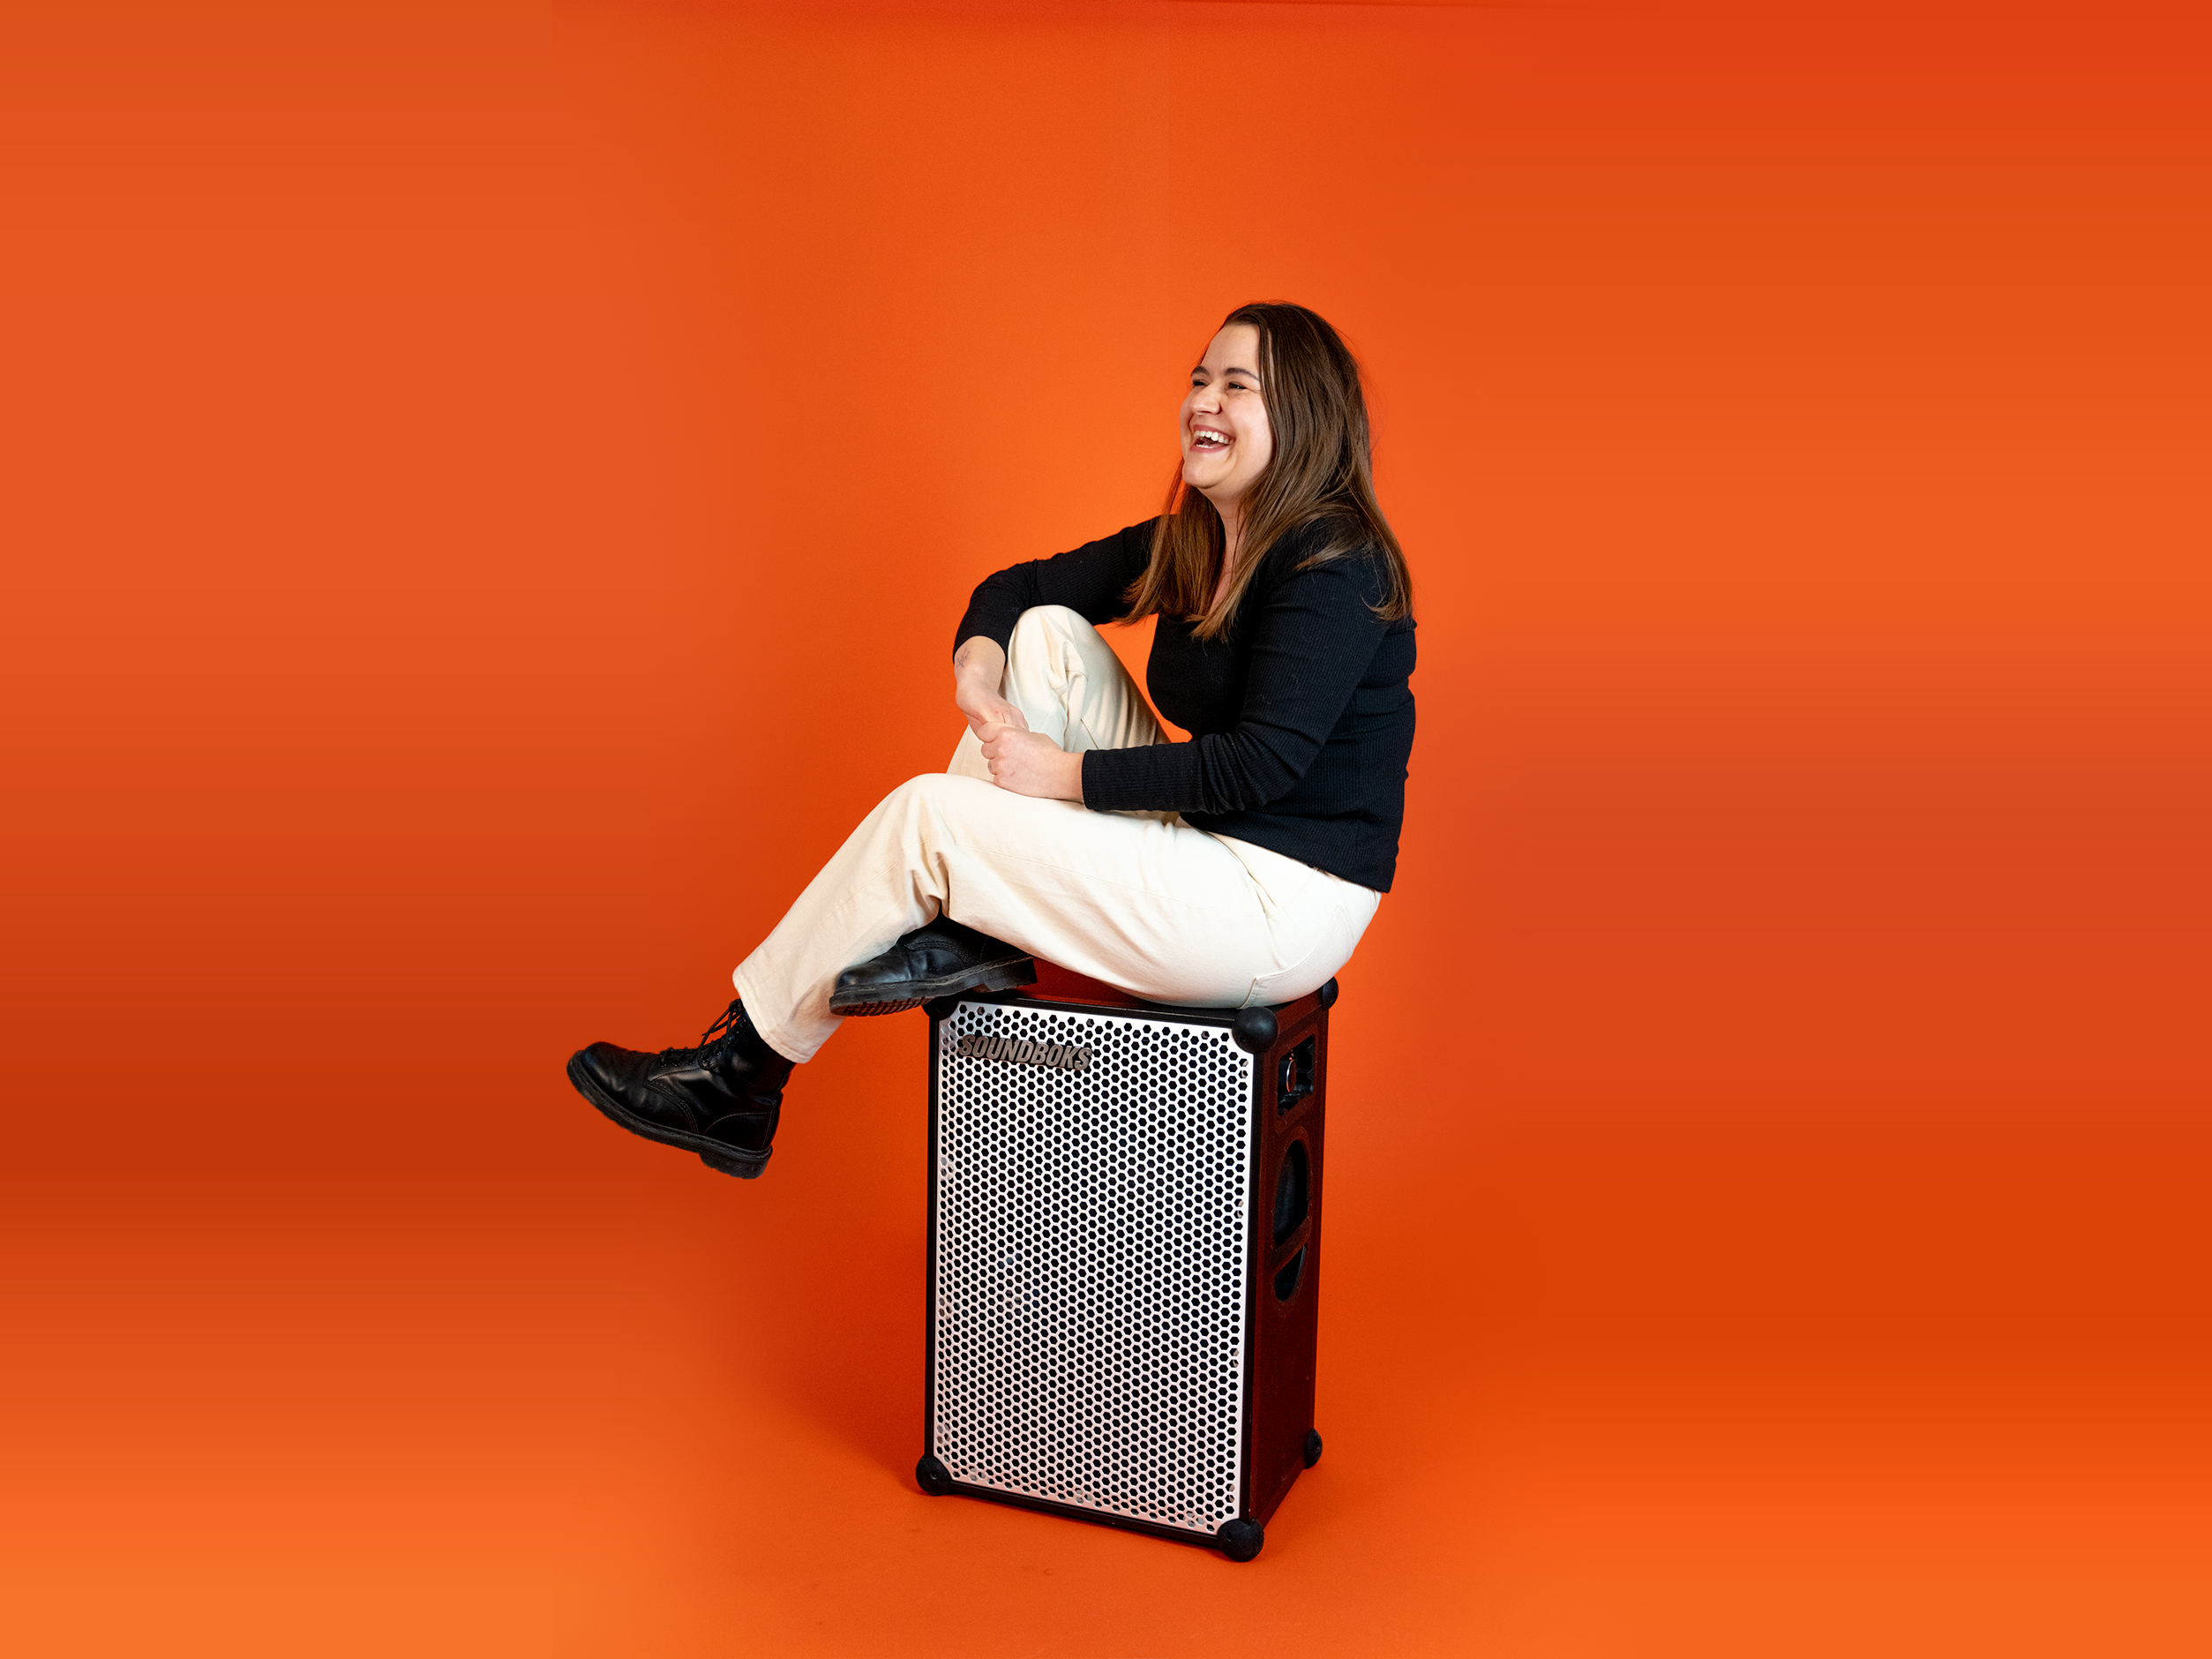 Ewa, in a black outfit sitting on top of a SOUNDBOKS in front of an orange background